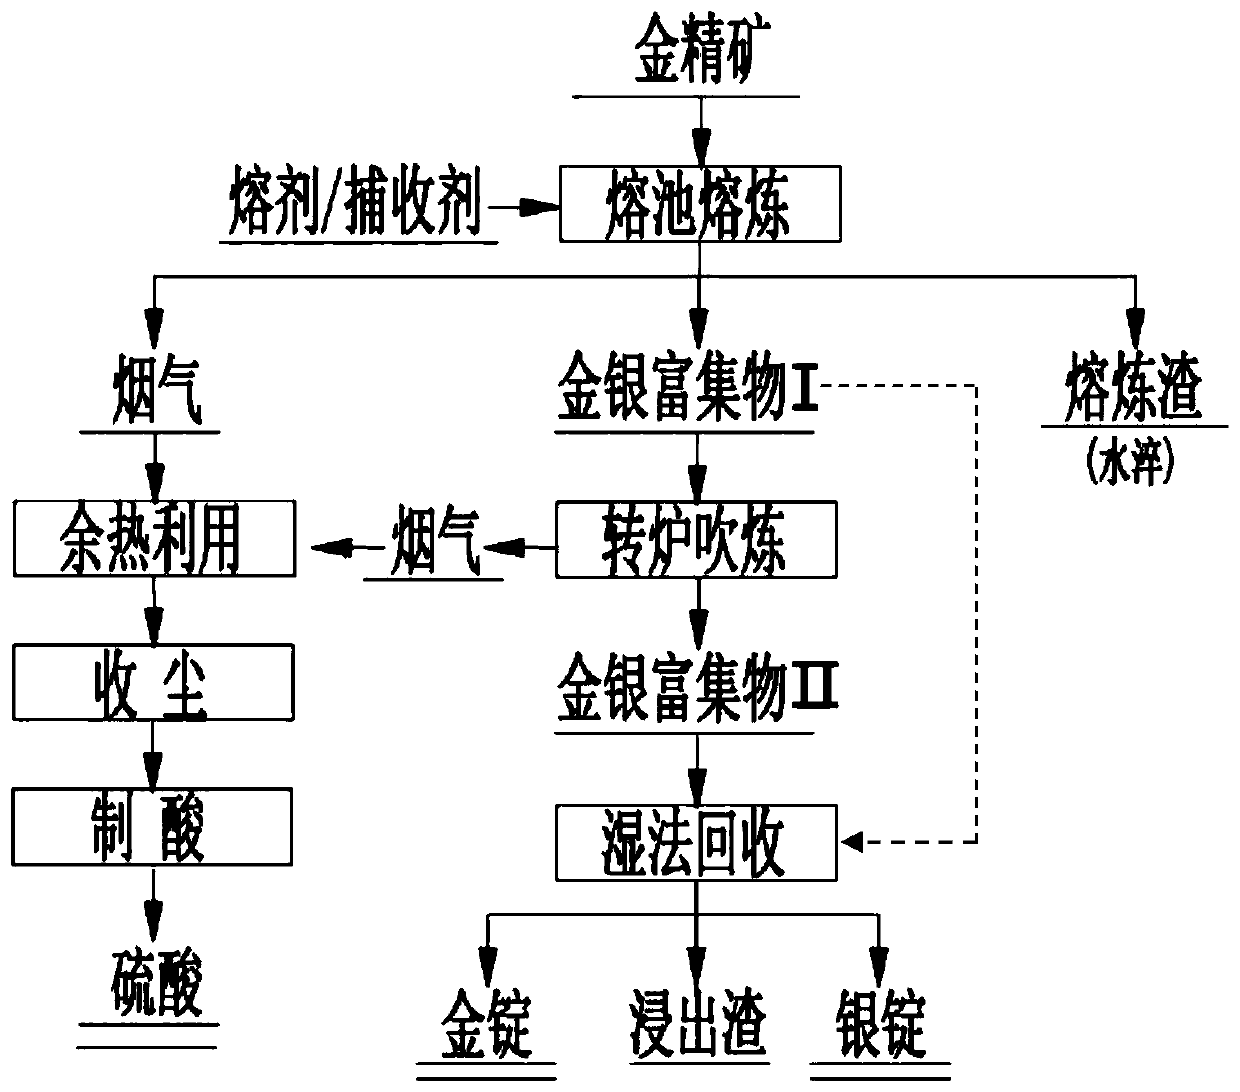 Method suitable for independent smelting of various types of complex gold concentrate